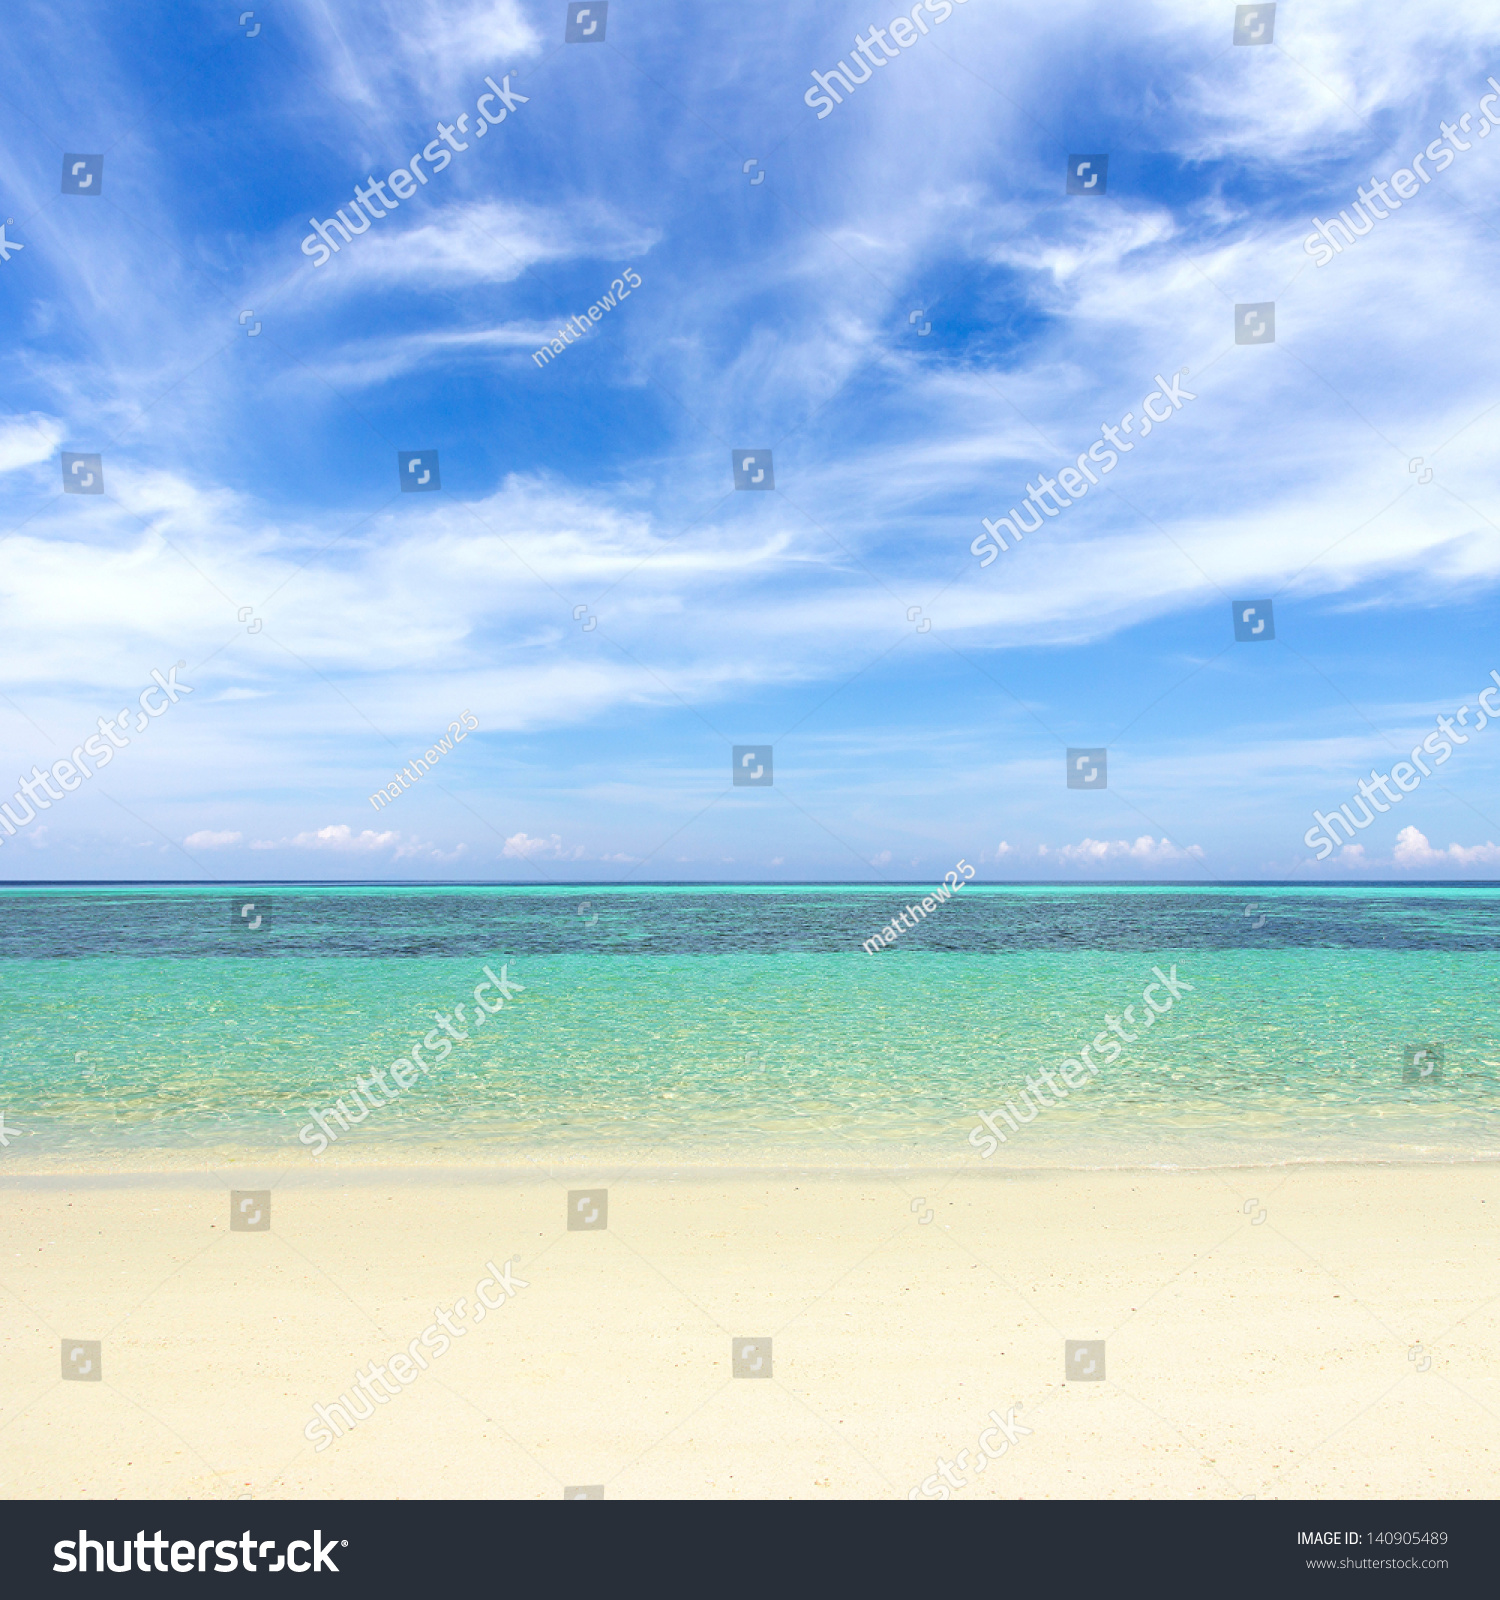 Beaches Crystal Clear Water Blue Sky Stock Photo Edit Now 140905489